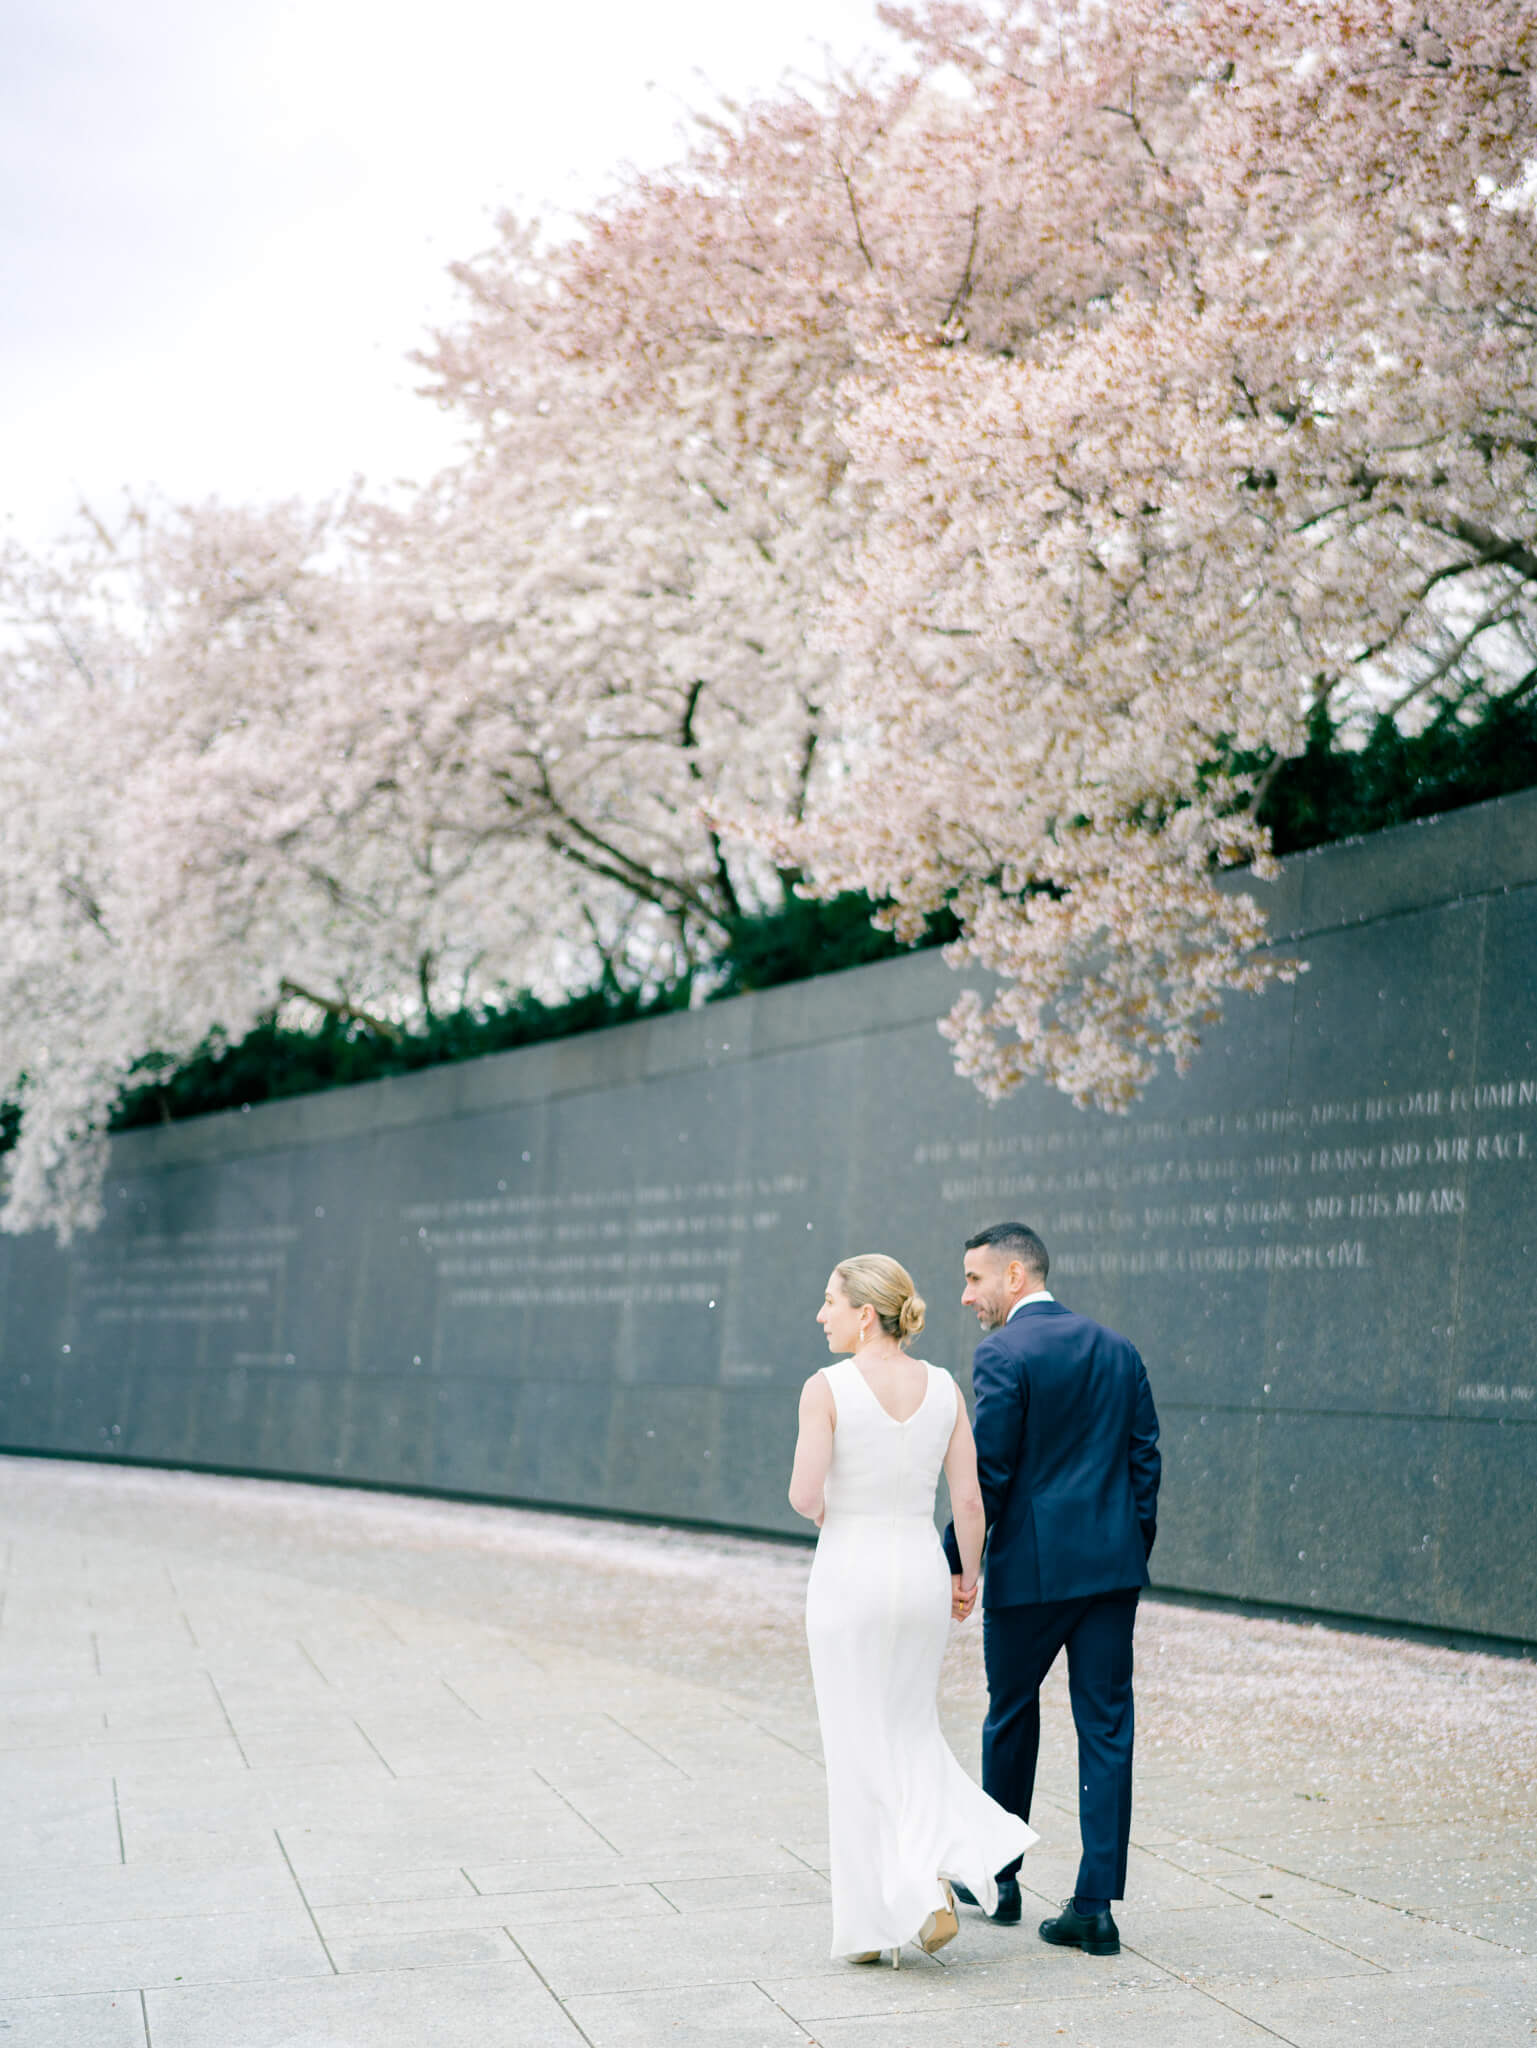 A bride and groom walking under the cherry blossom trees at the MLK Memorial in Washington, D.C.